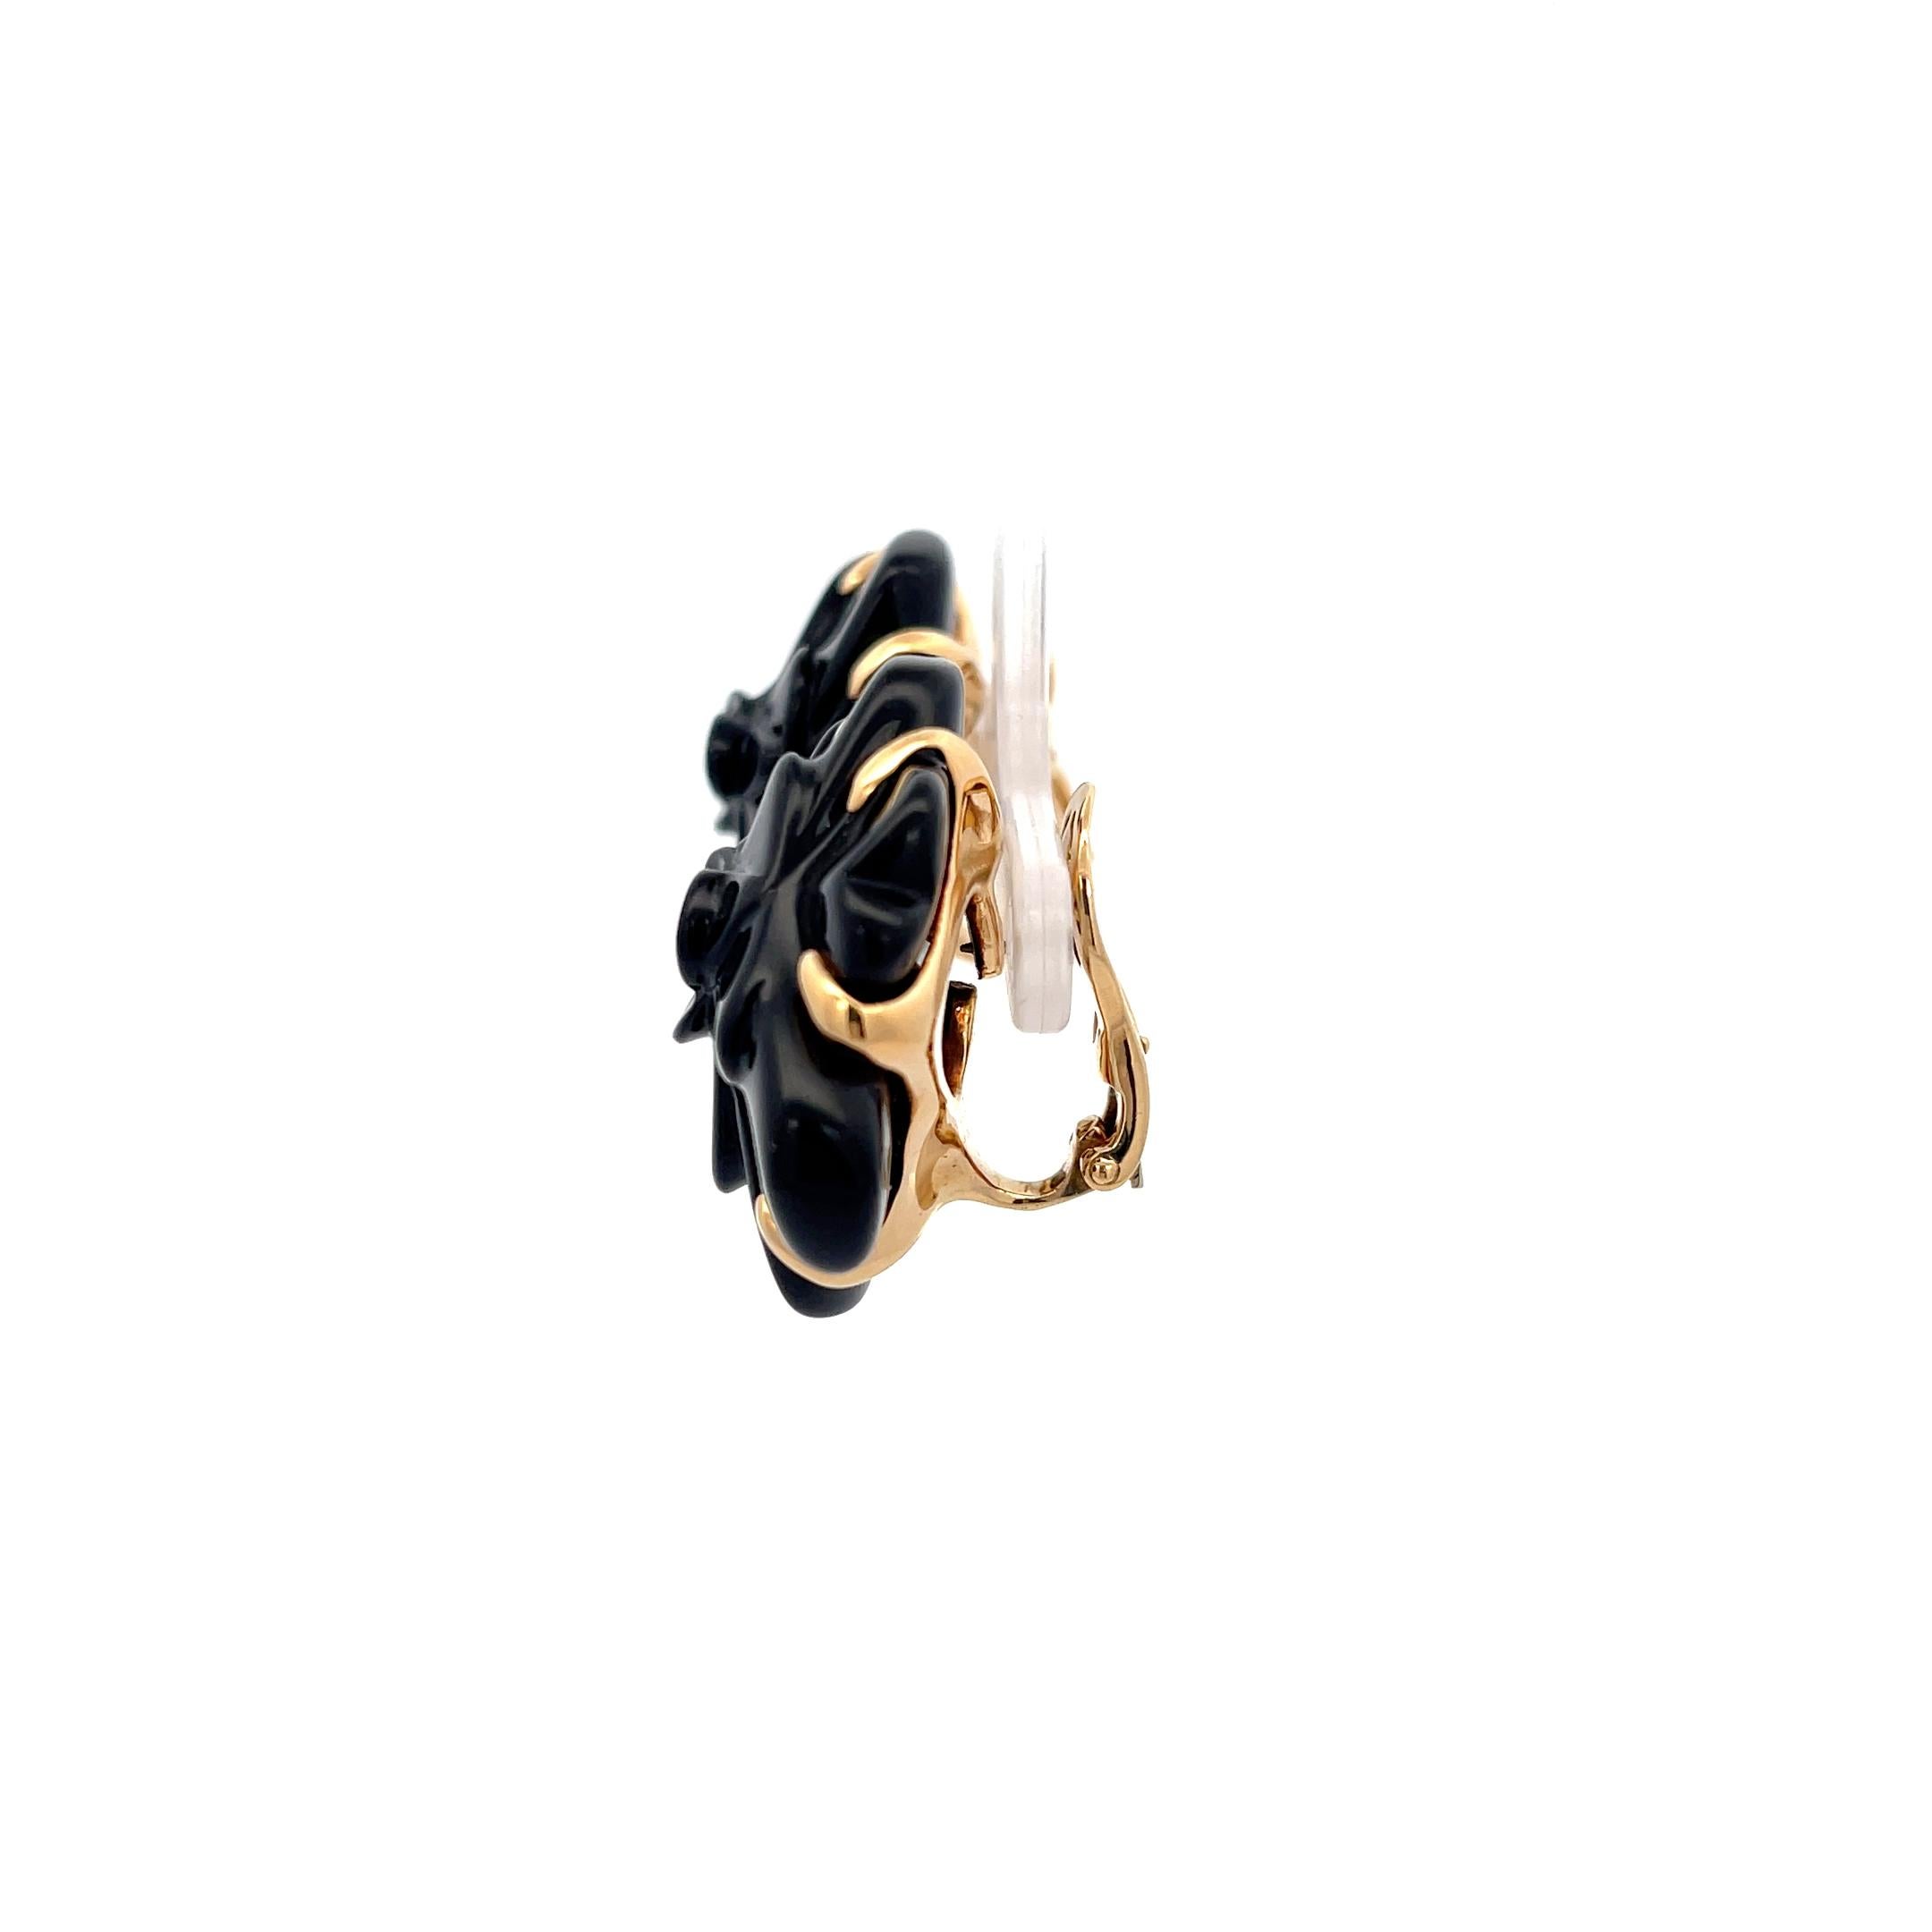 Estate Chanel Camellia Black Agate Earrings in 18K Yellow Gold. Clip-on.
1.25